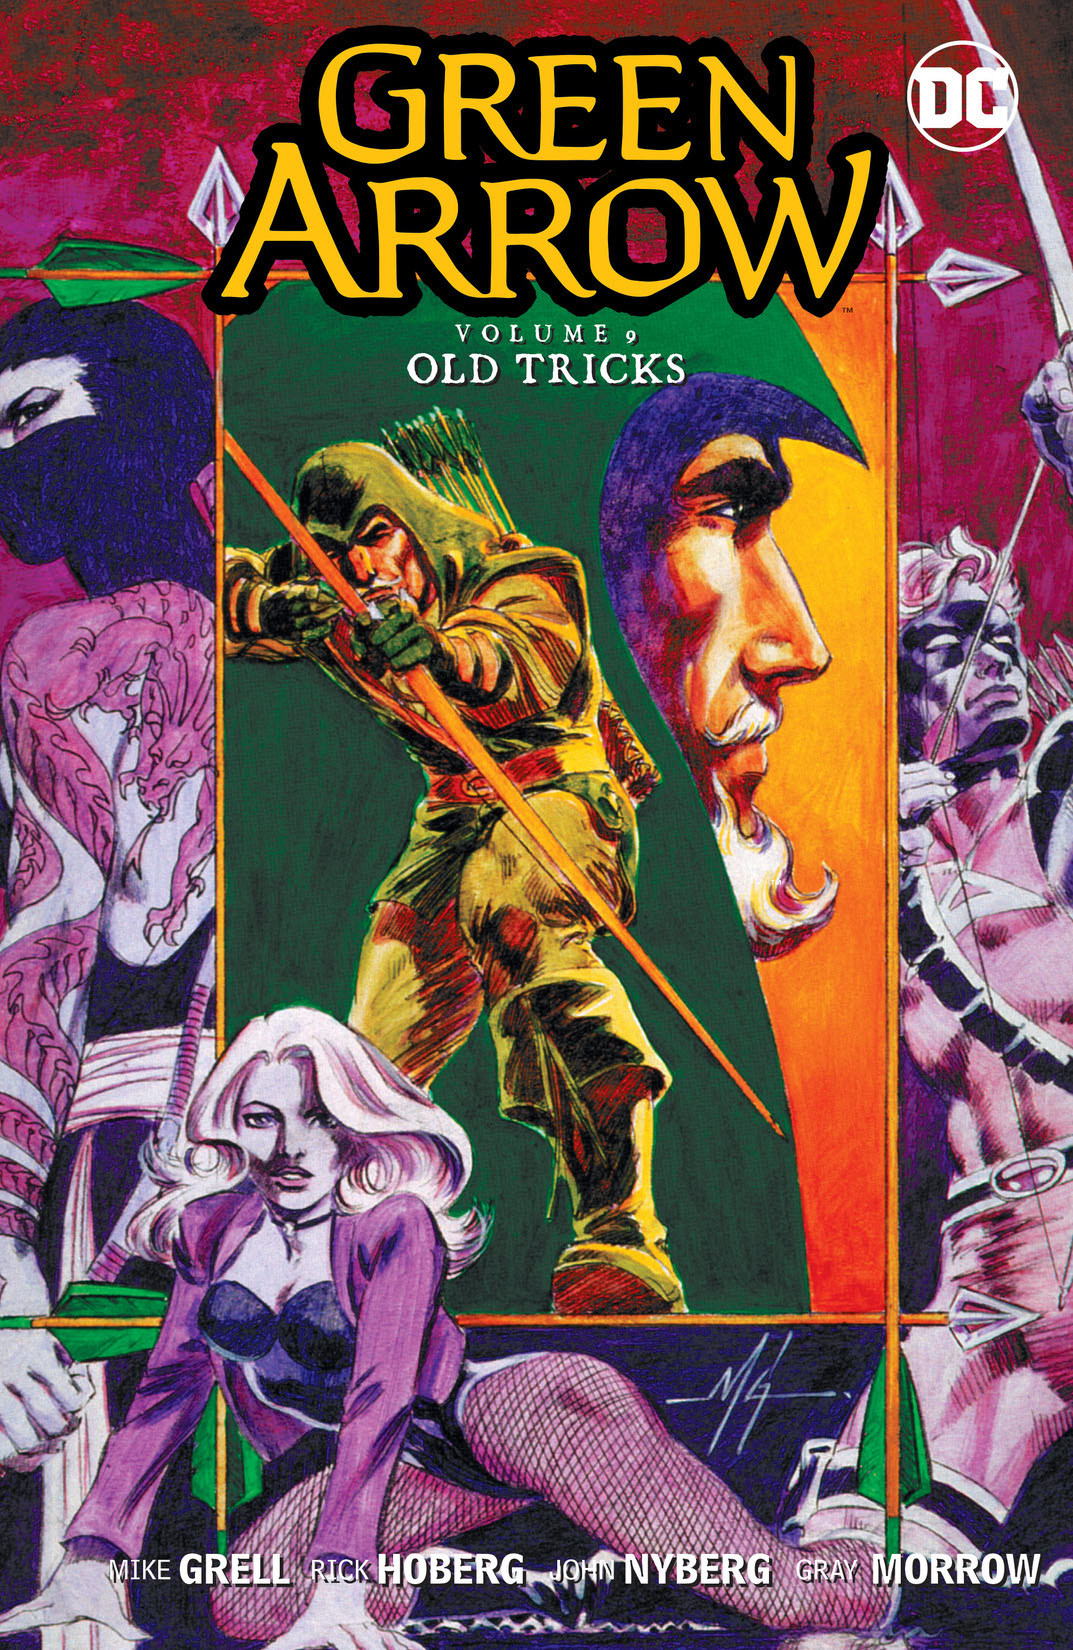 Green Arrow Vol. 9: Old Tricks preview images